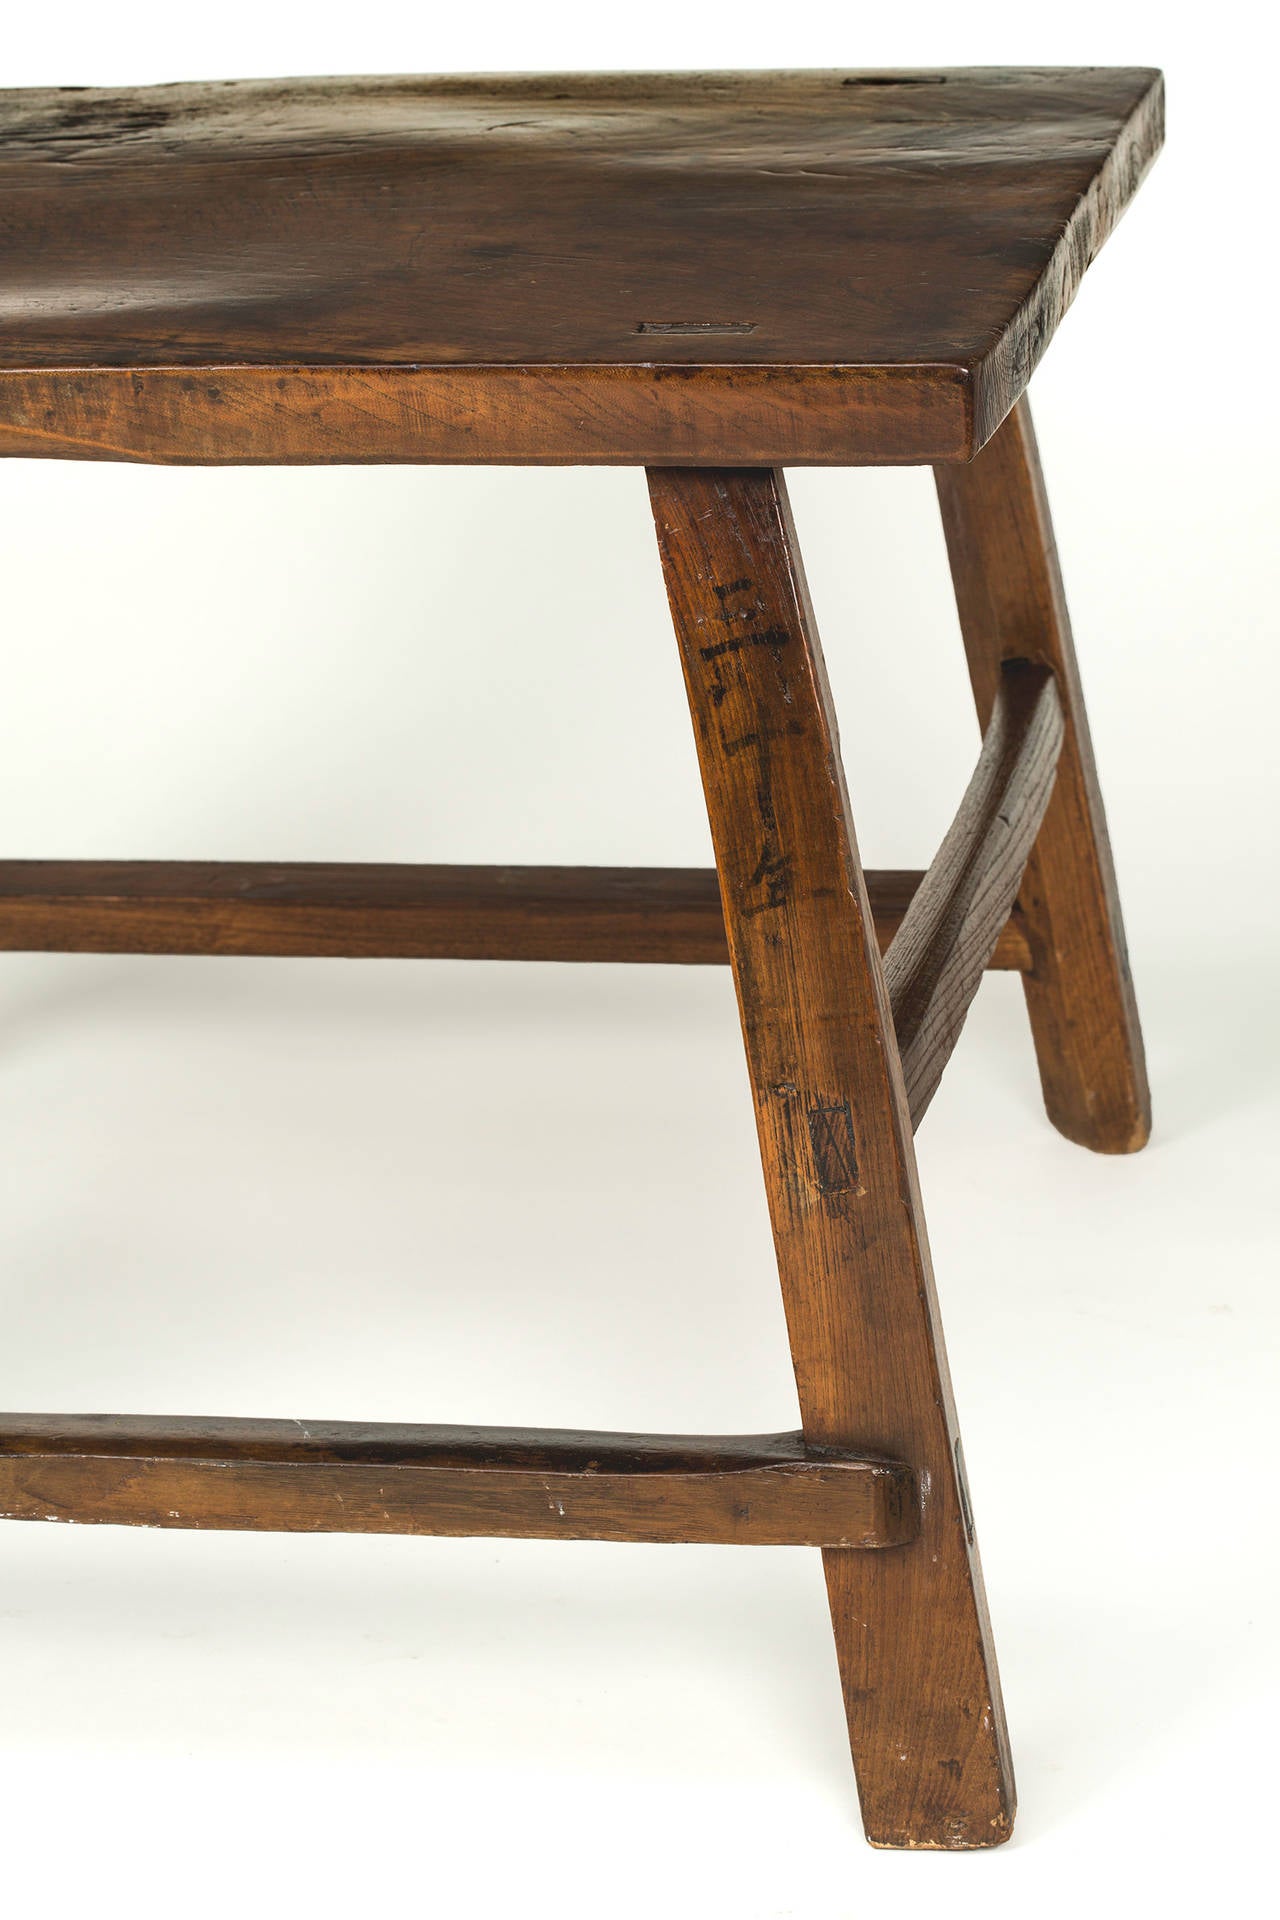 Primitive Chinese Elmwood Table or Bench 2